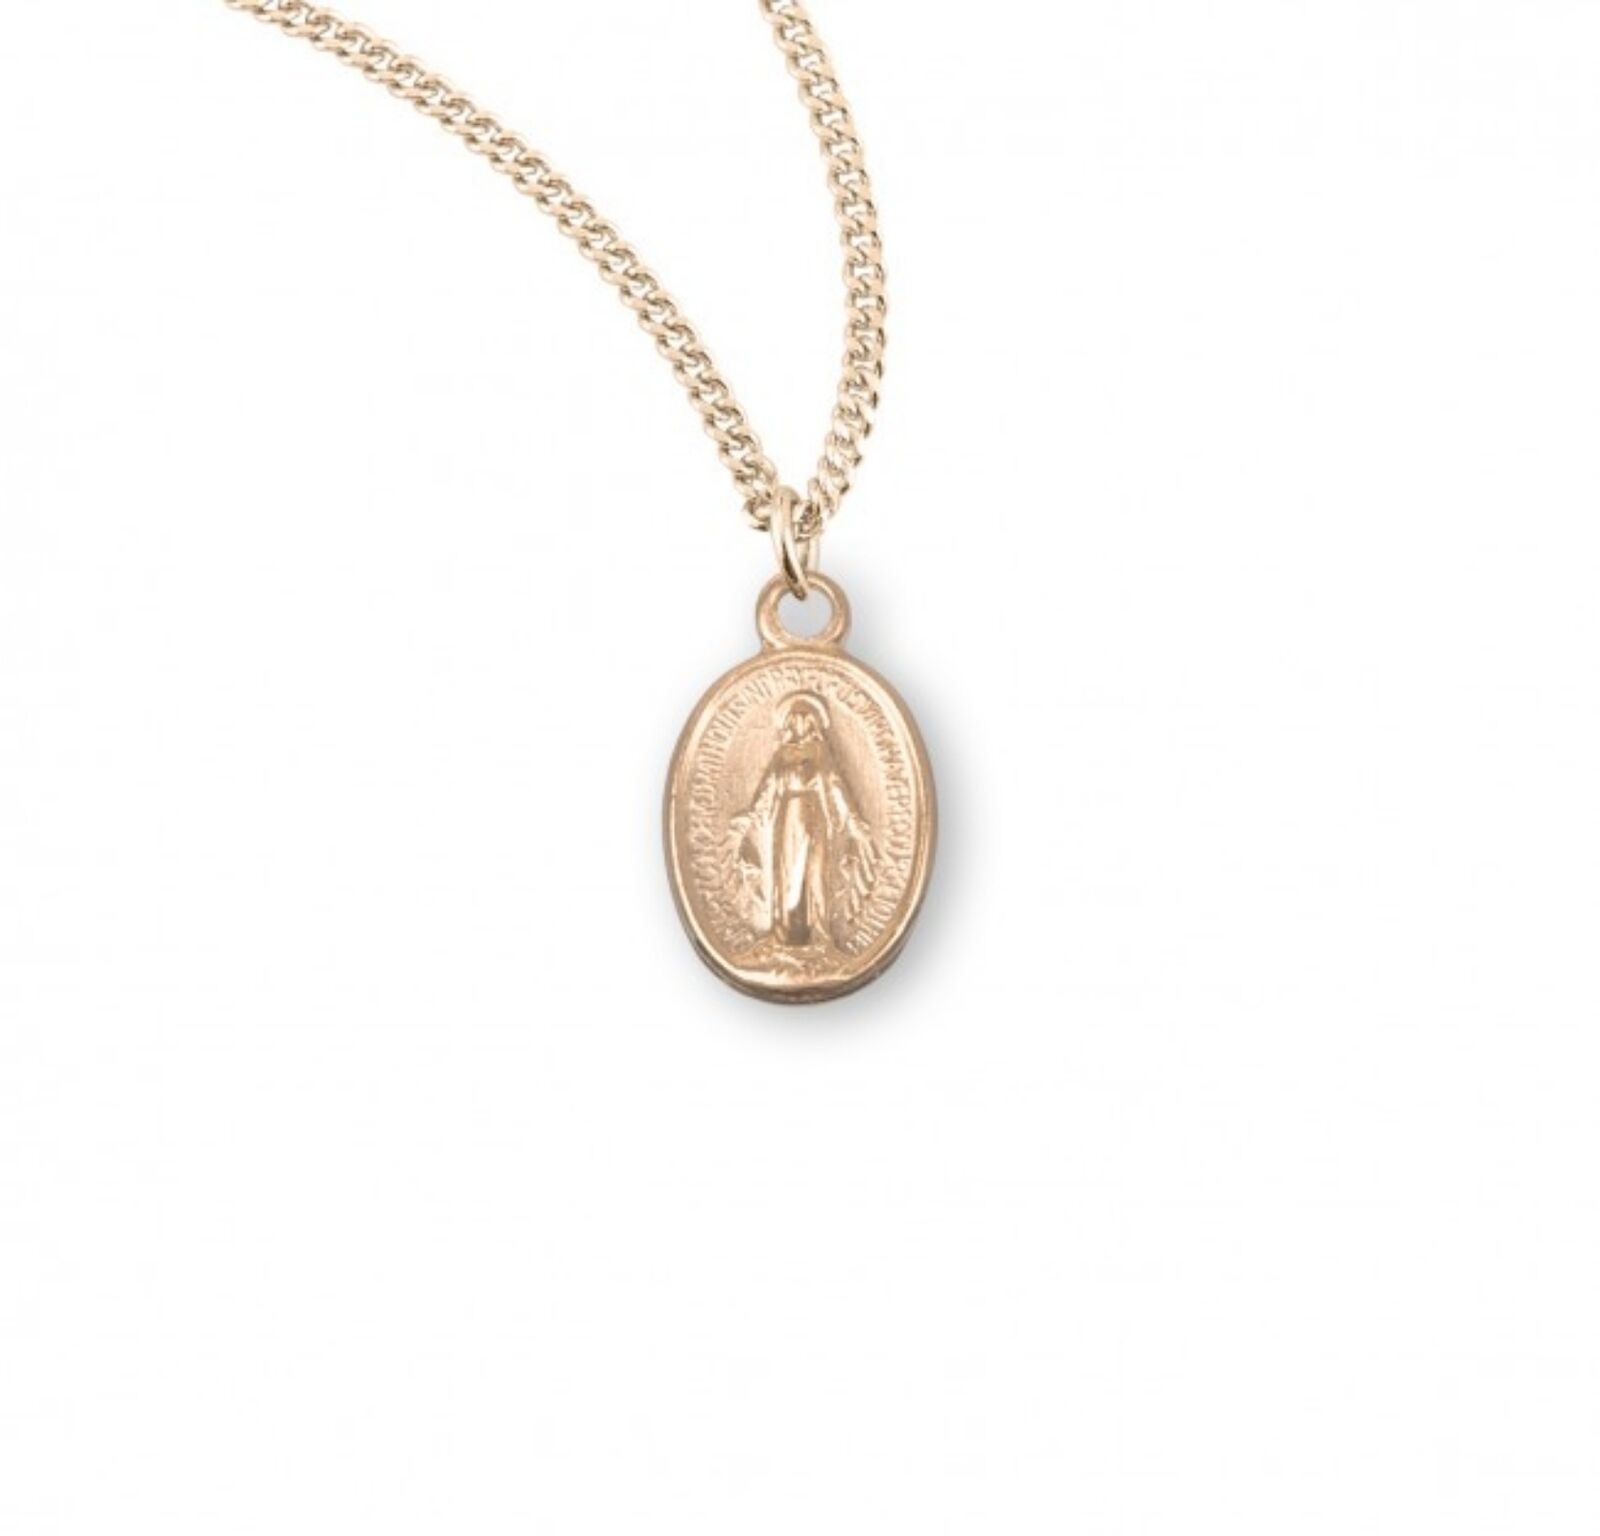 N.G. Gold over Sterling Silver Miraculous Medal Pendant on 18 Inch Chain